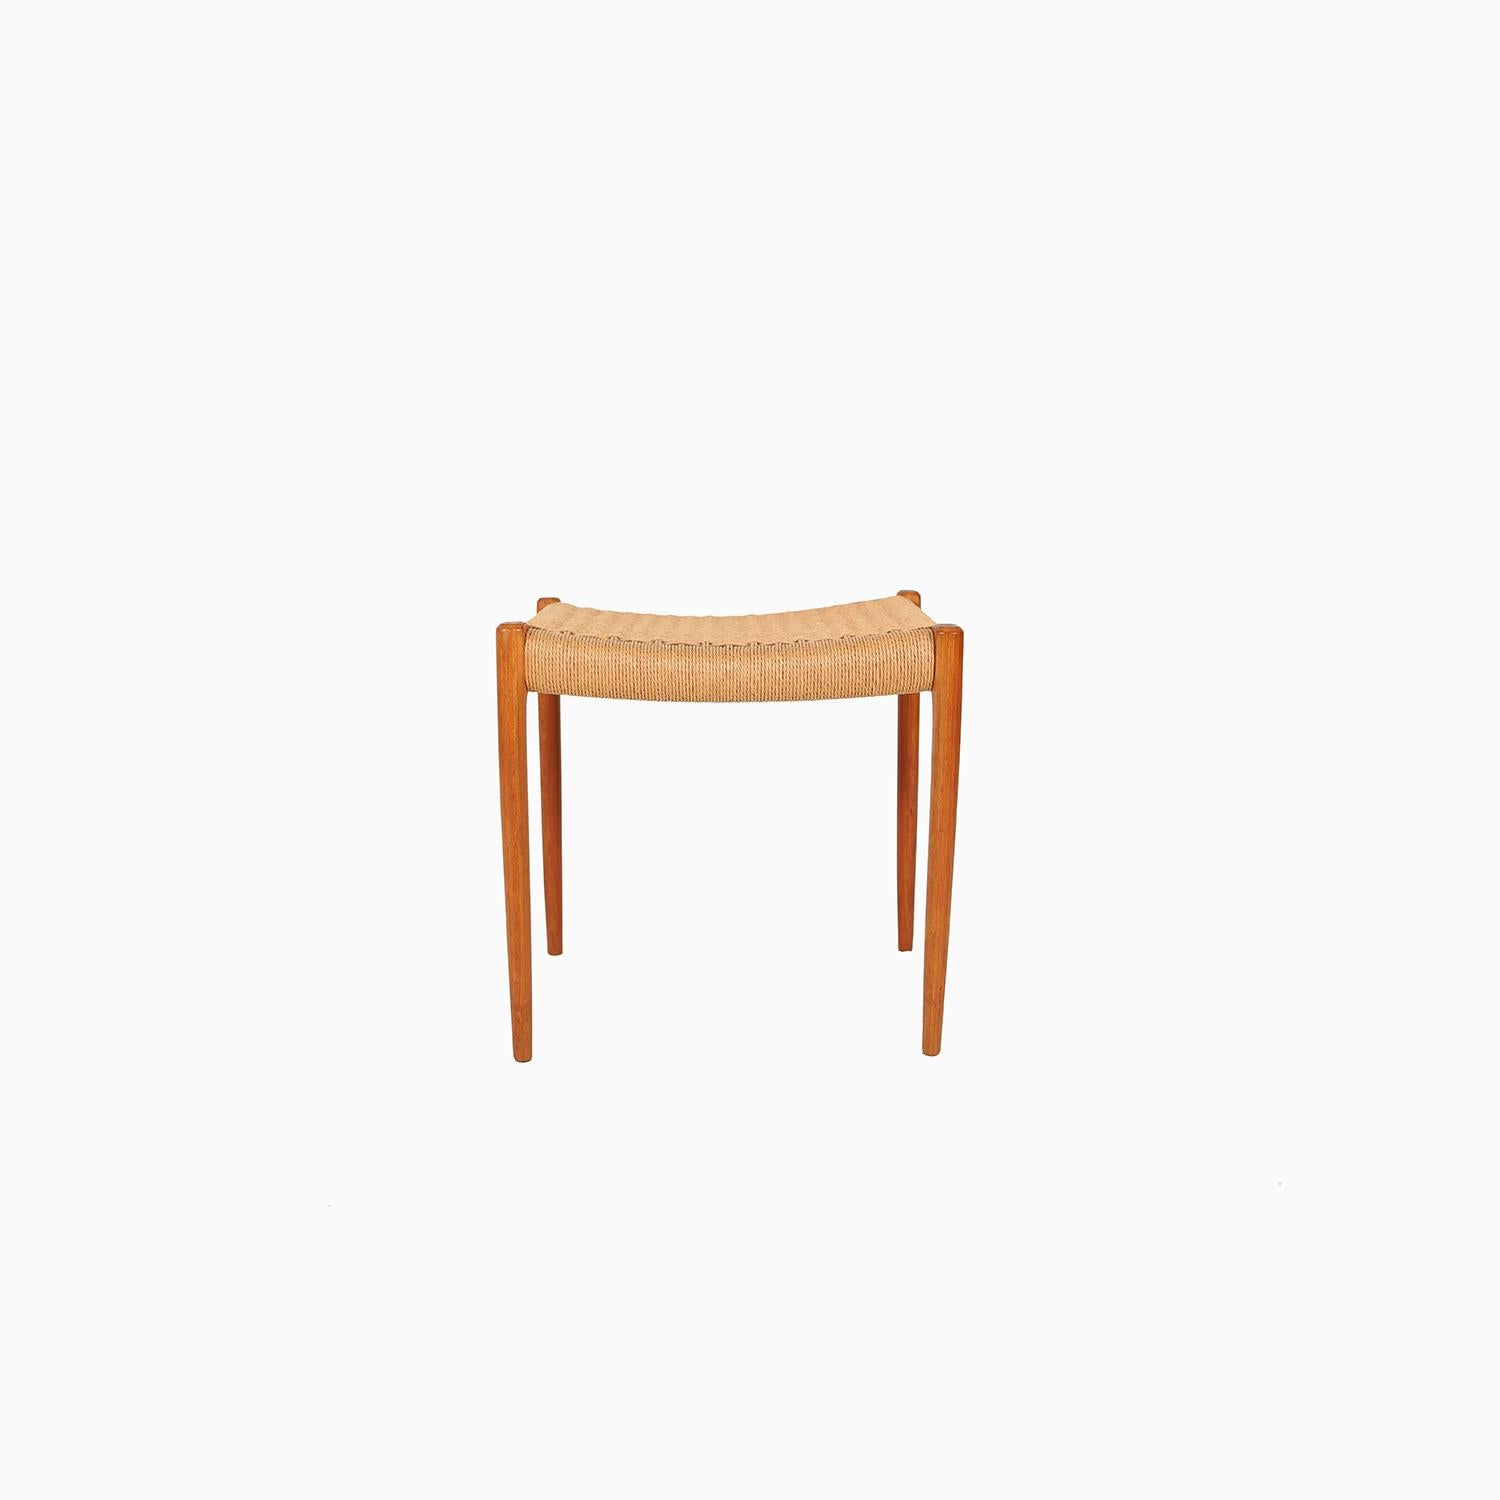 A classic Danish modern stool produced by J.L. Møller. Teak legs with paper cord seat. Original paper cord is in good condition with a light patina.

Professional, skilled furniture restoration is an integral part of what we do every day. Our goal